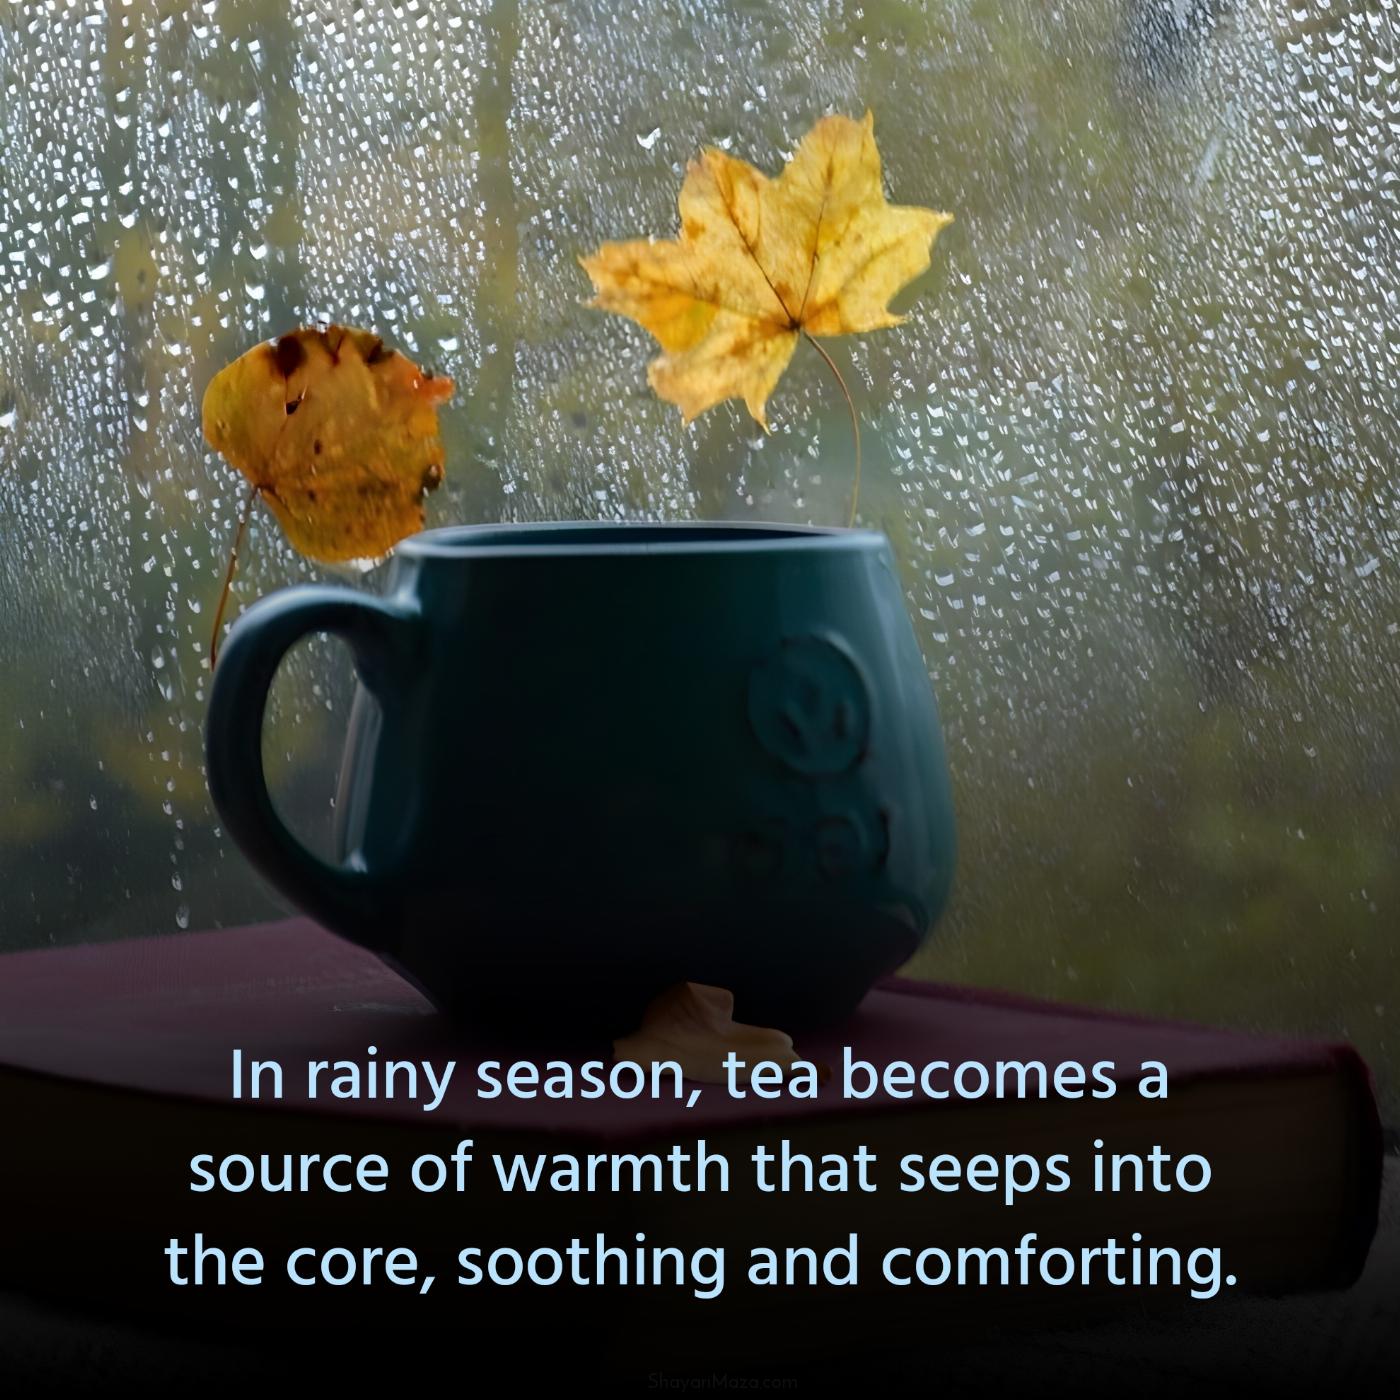 In rainy season tea becomes a source of warmth that seeps into